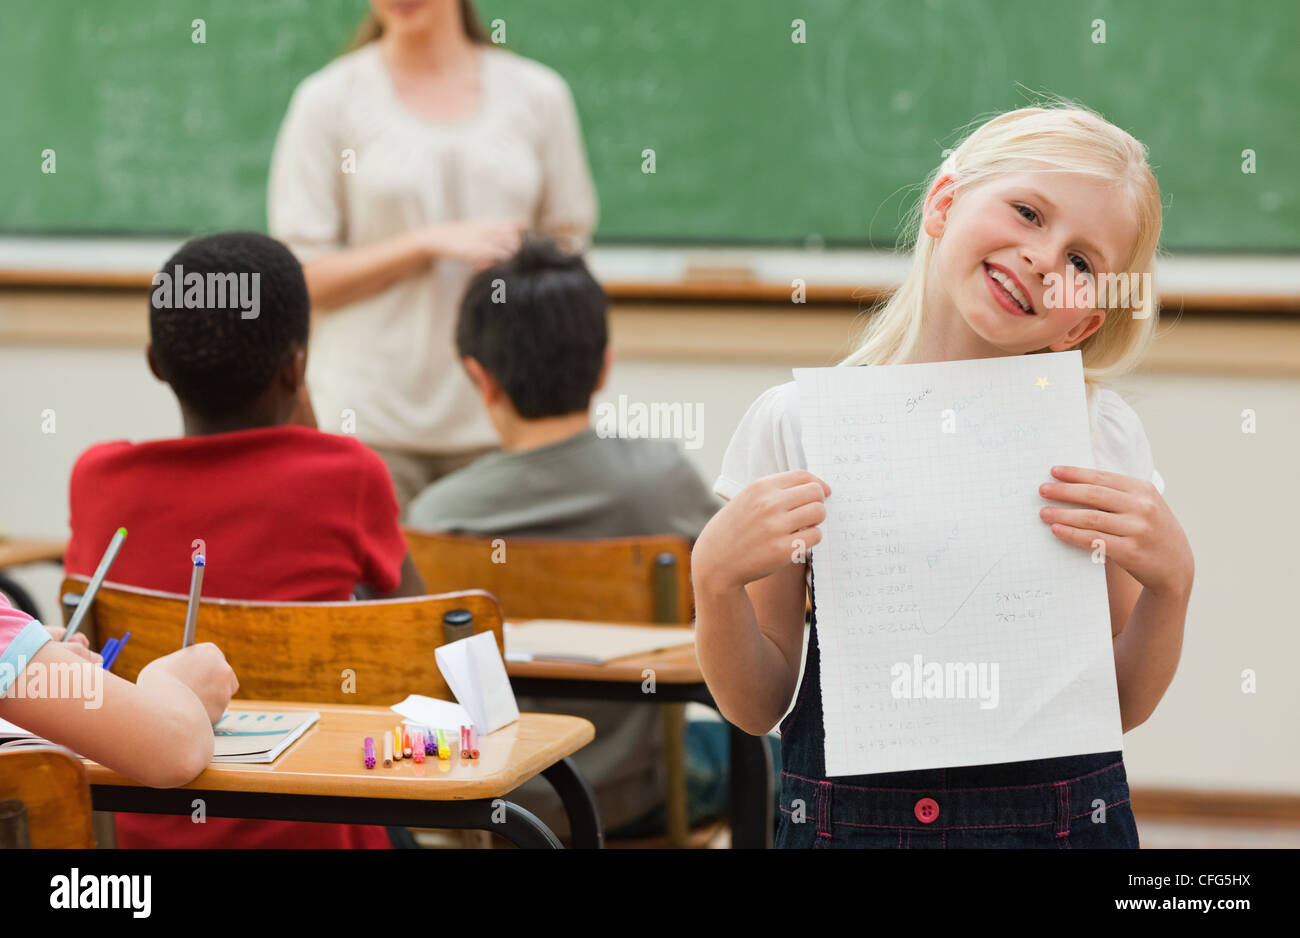 Smiling girl showing test results Stock Photo